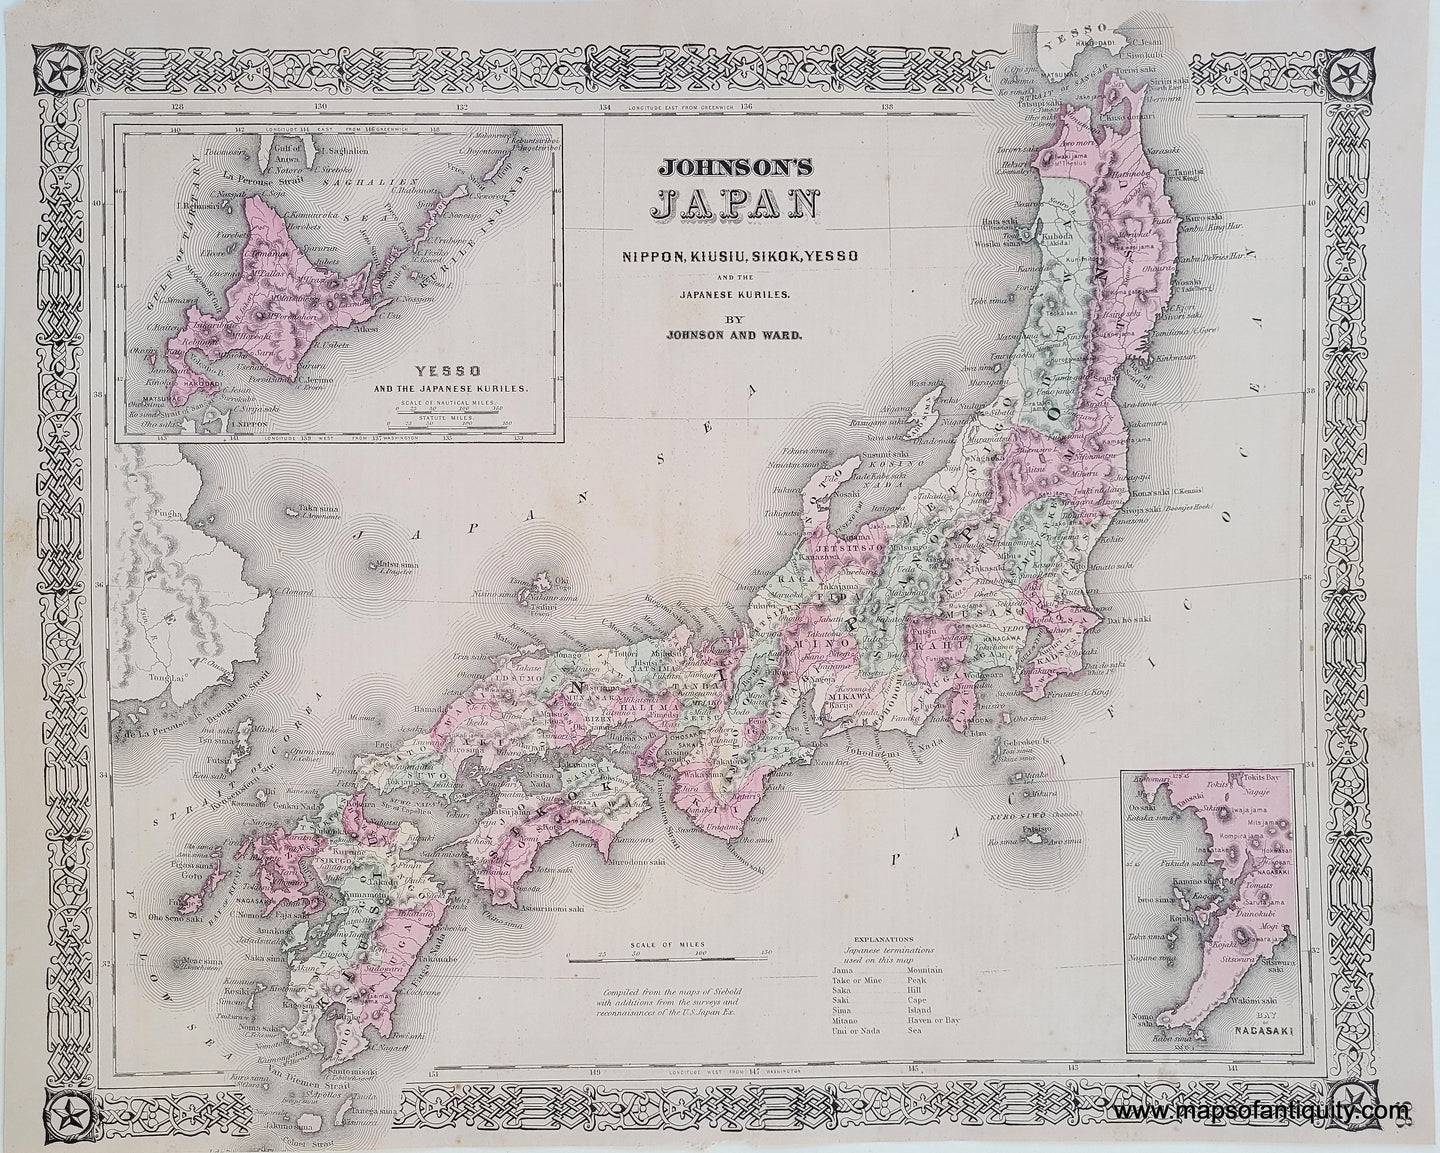 Antique map of Japan by Johnson and Ward, published in 1864, colored by region, with inset maps of yesso or Hokkaido and Nagasaki